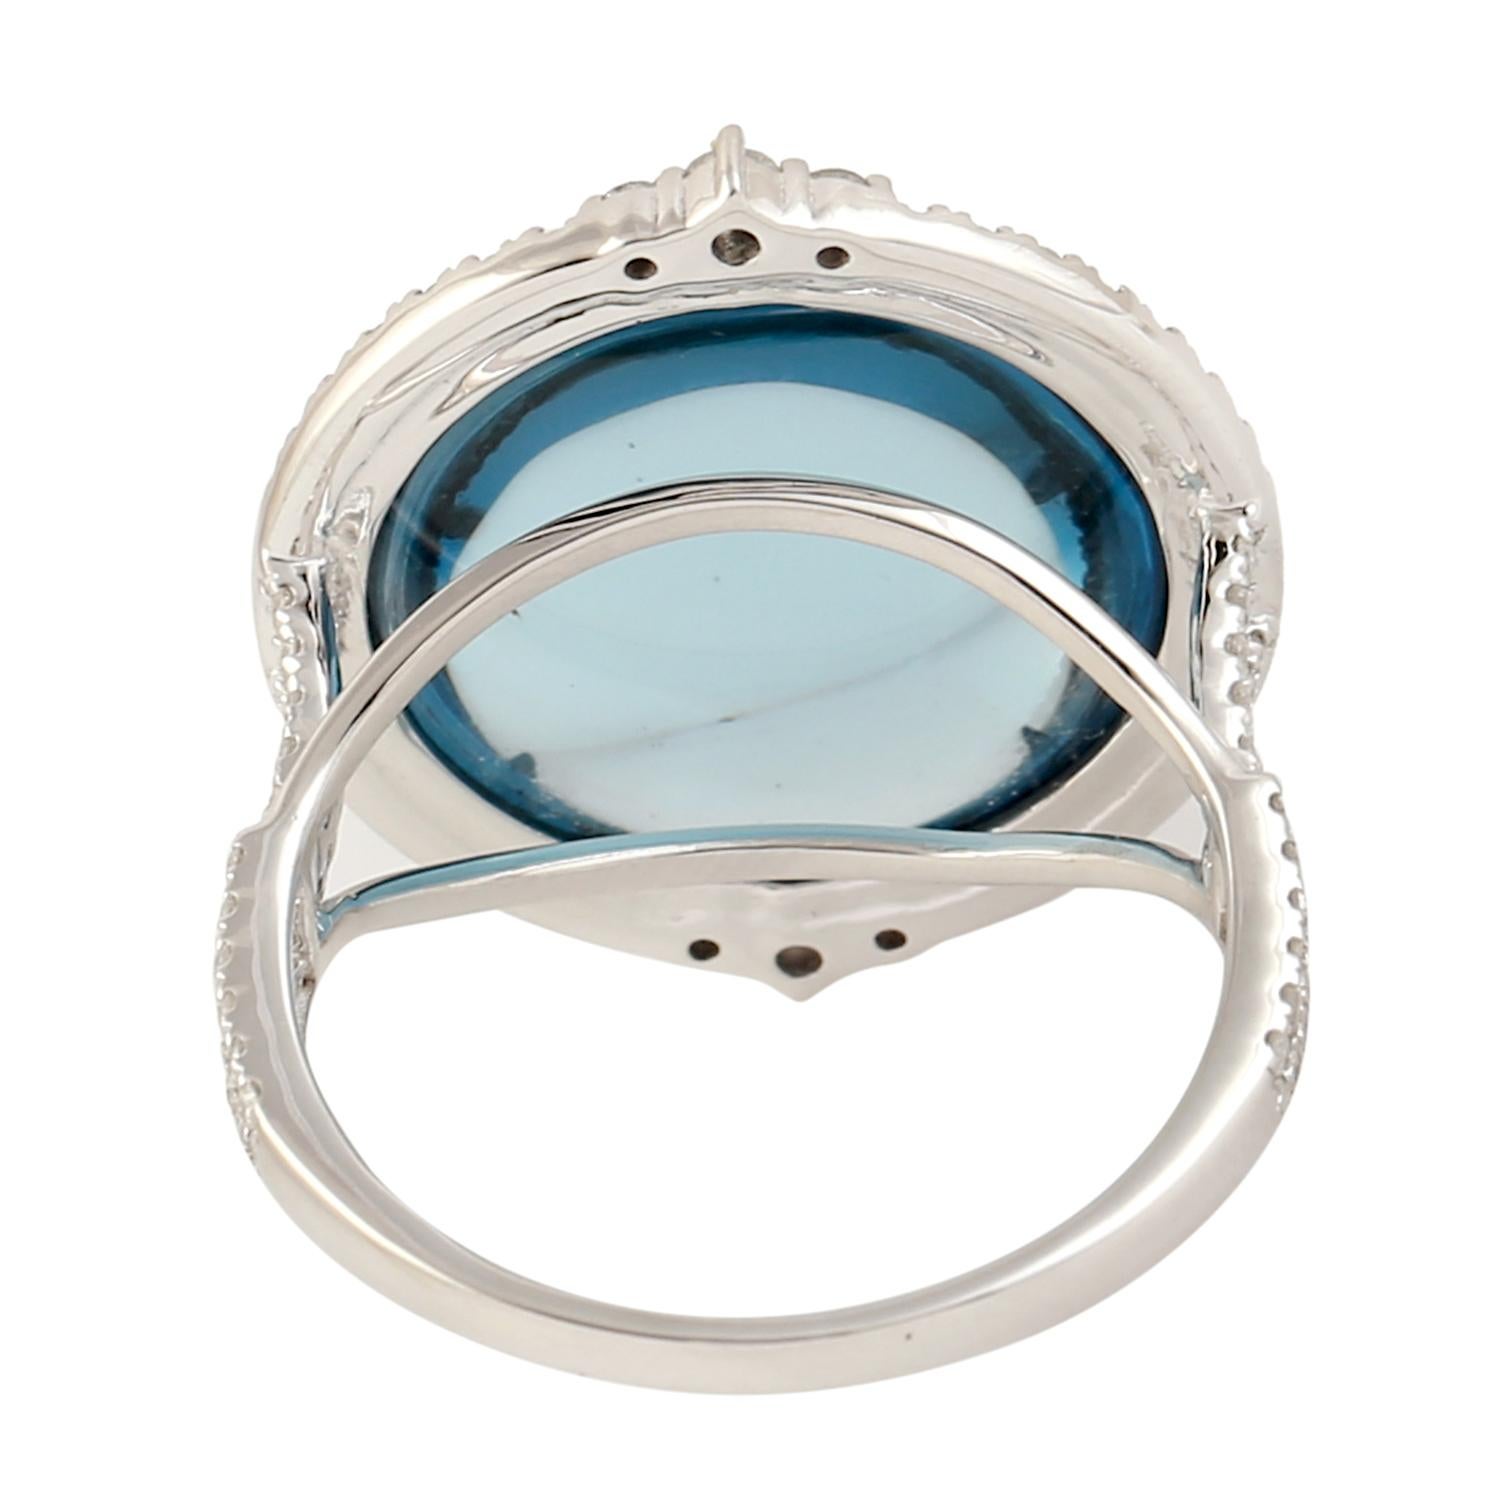 Artisan 15.14 ct Oval Shaped Blue Topaz Cocktail Ring w/ Diamonds Made In 18k White Gold For Sale